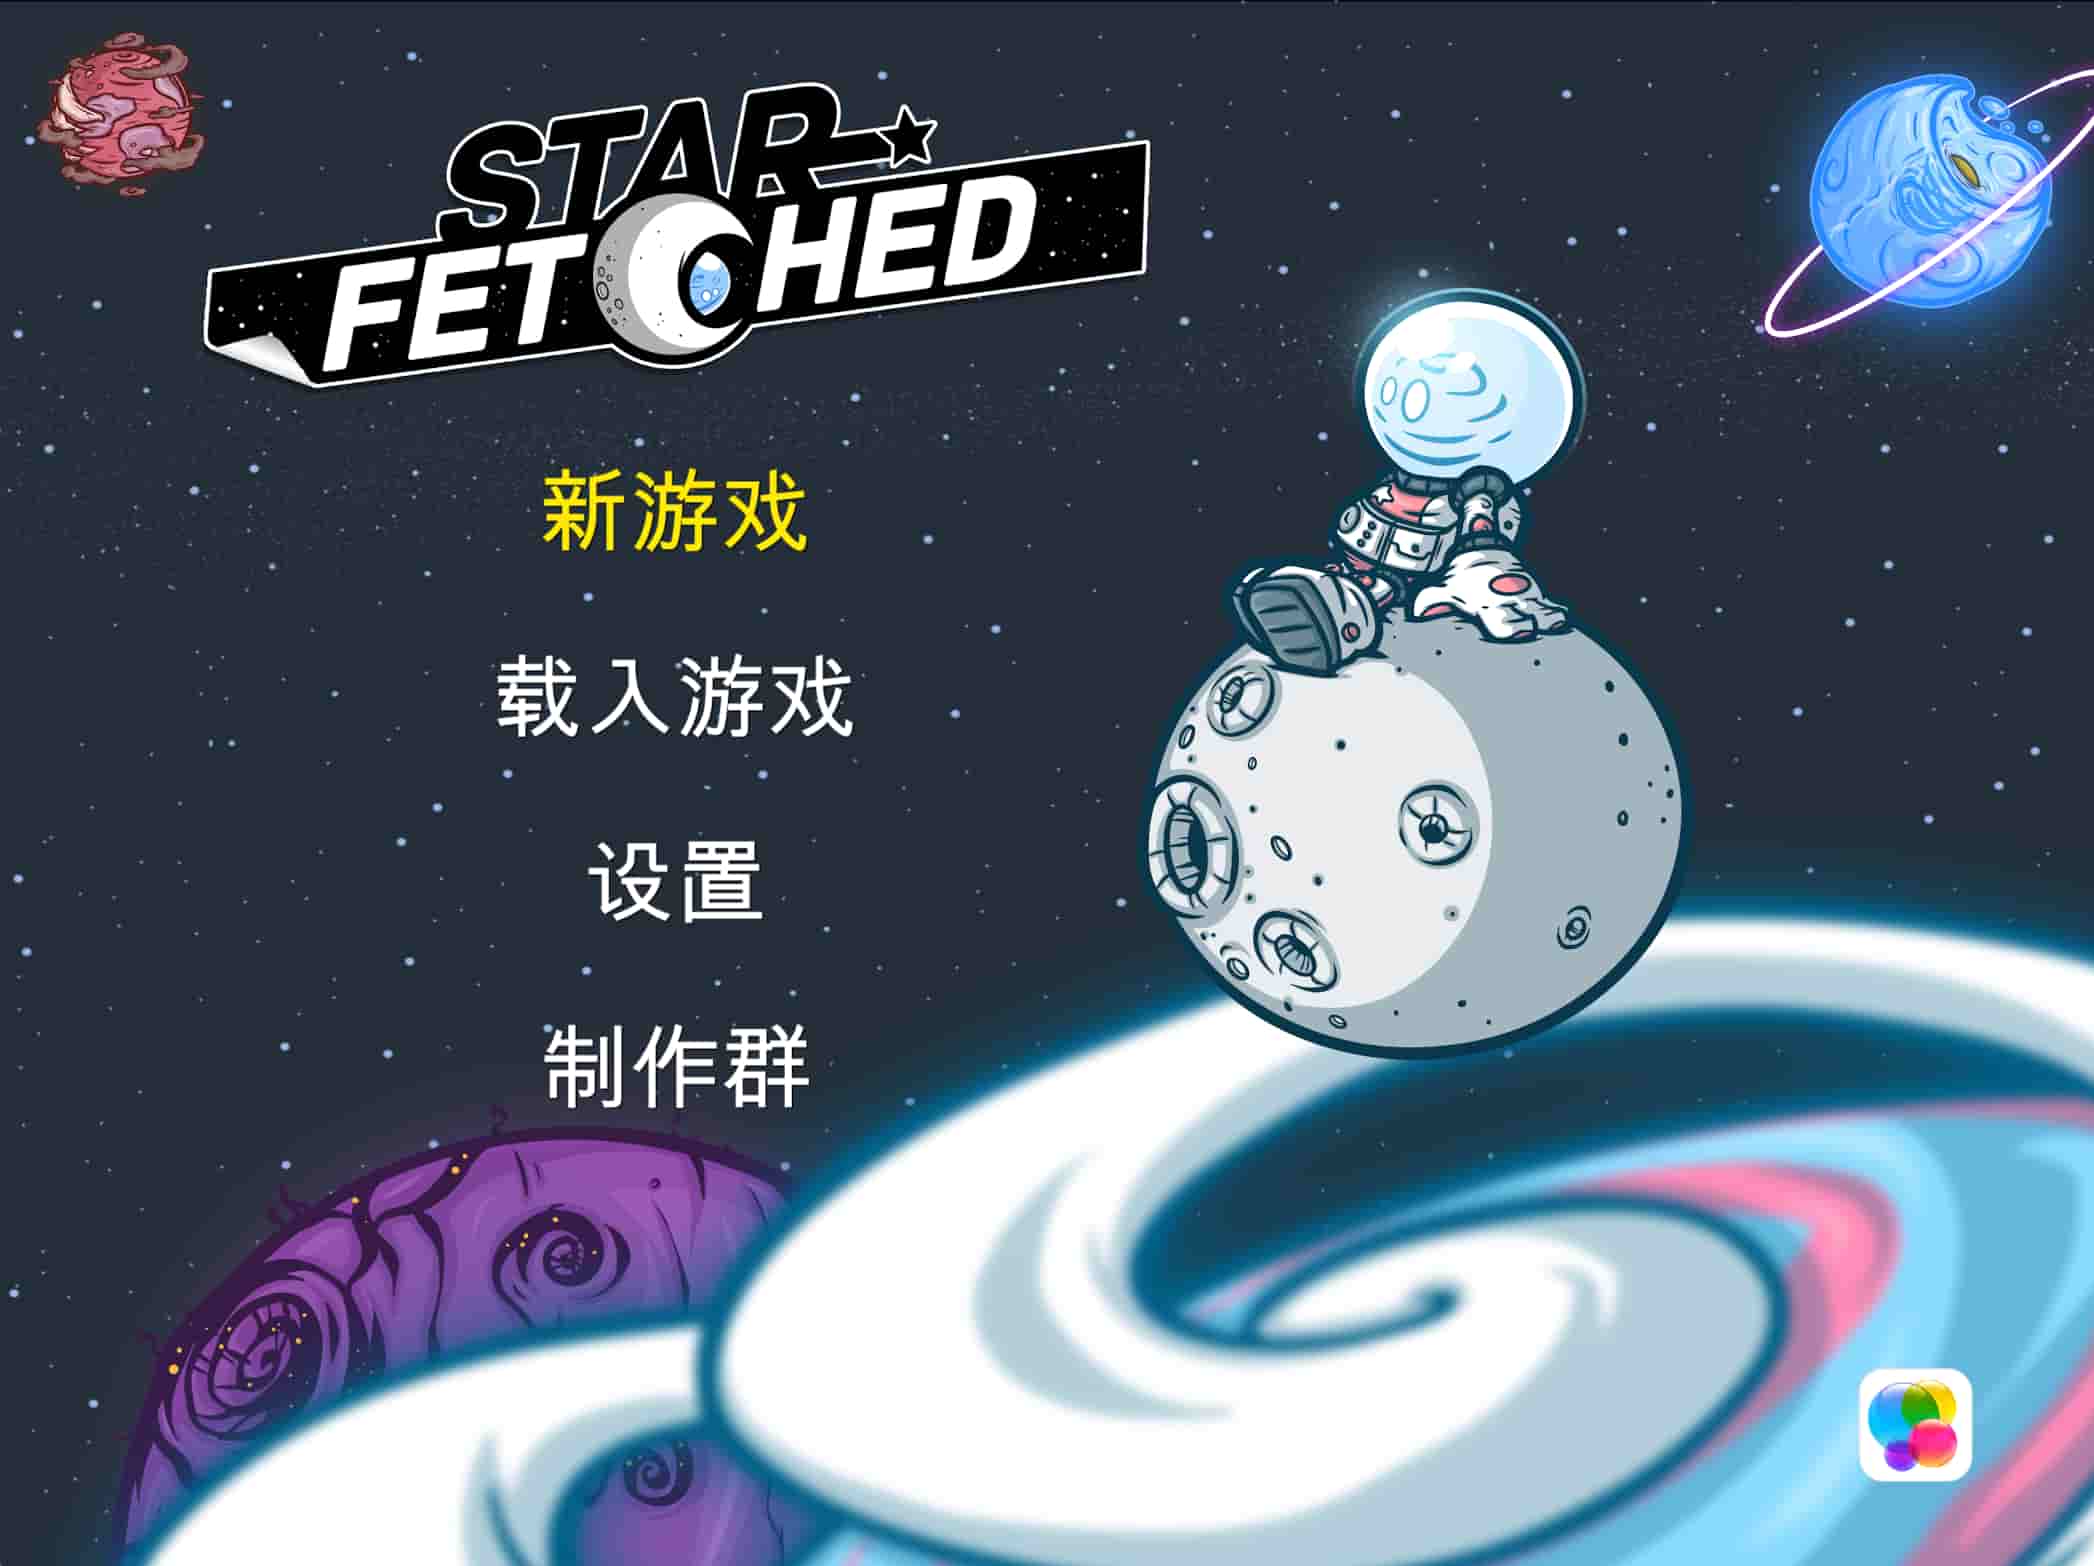 Star Fetched